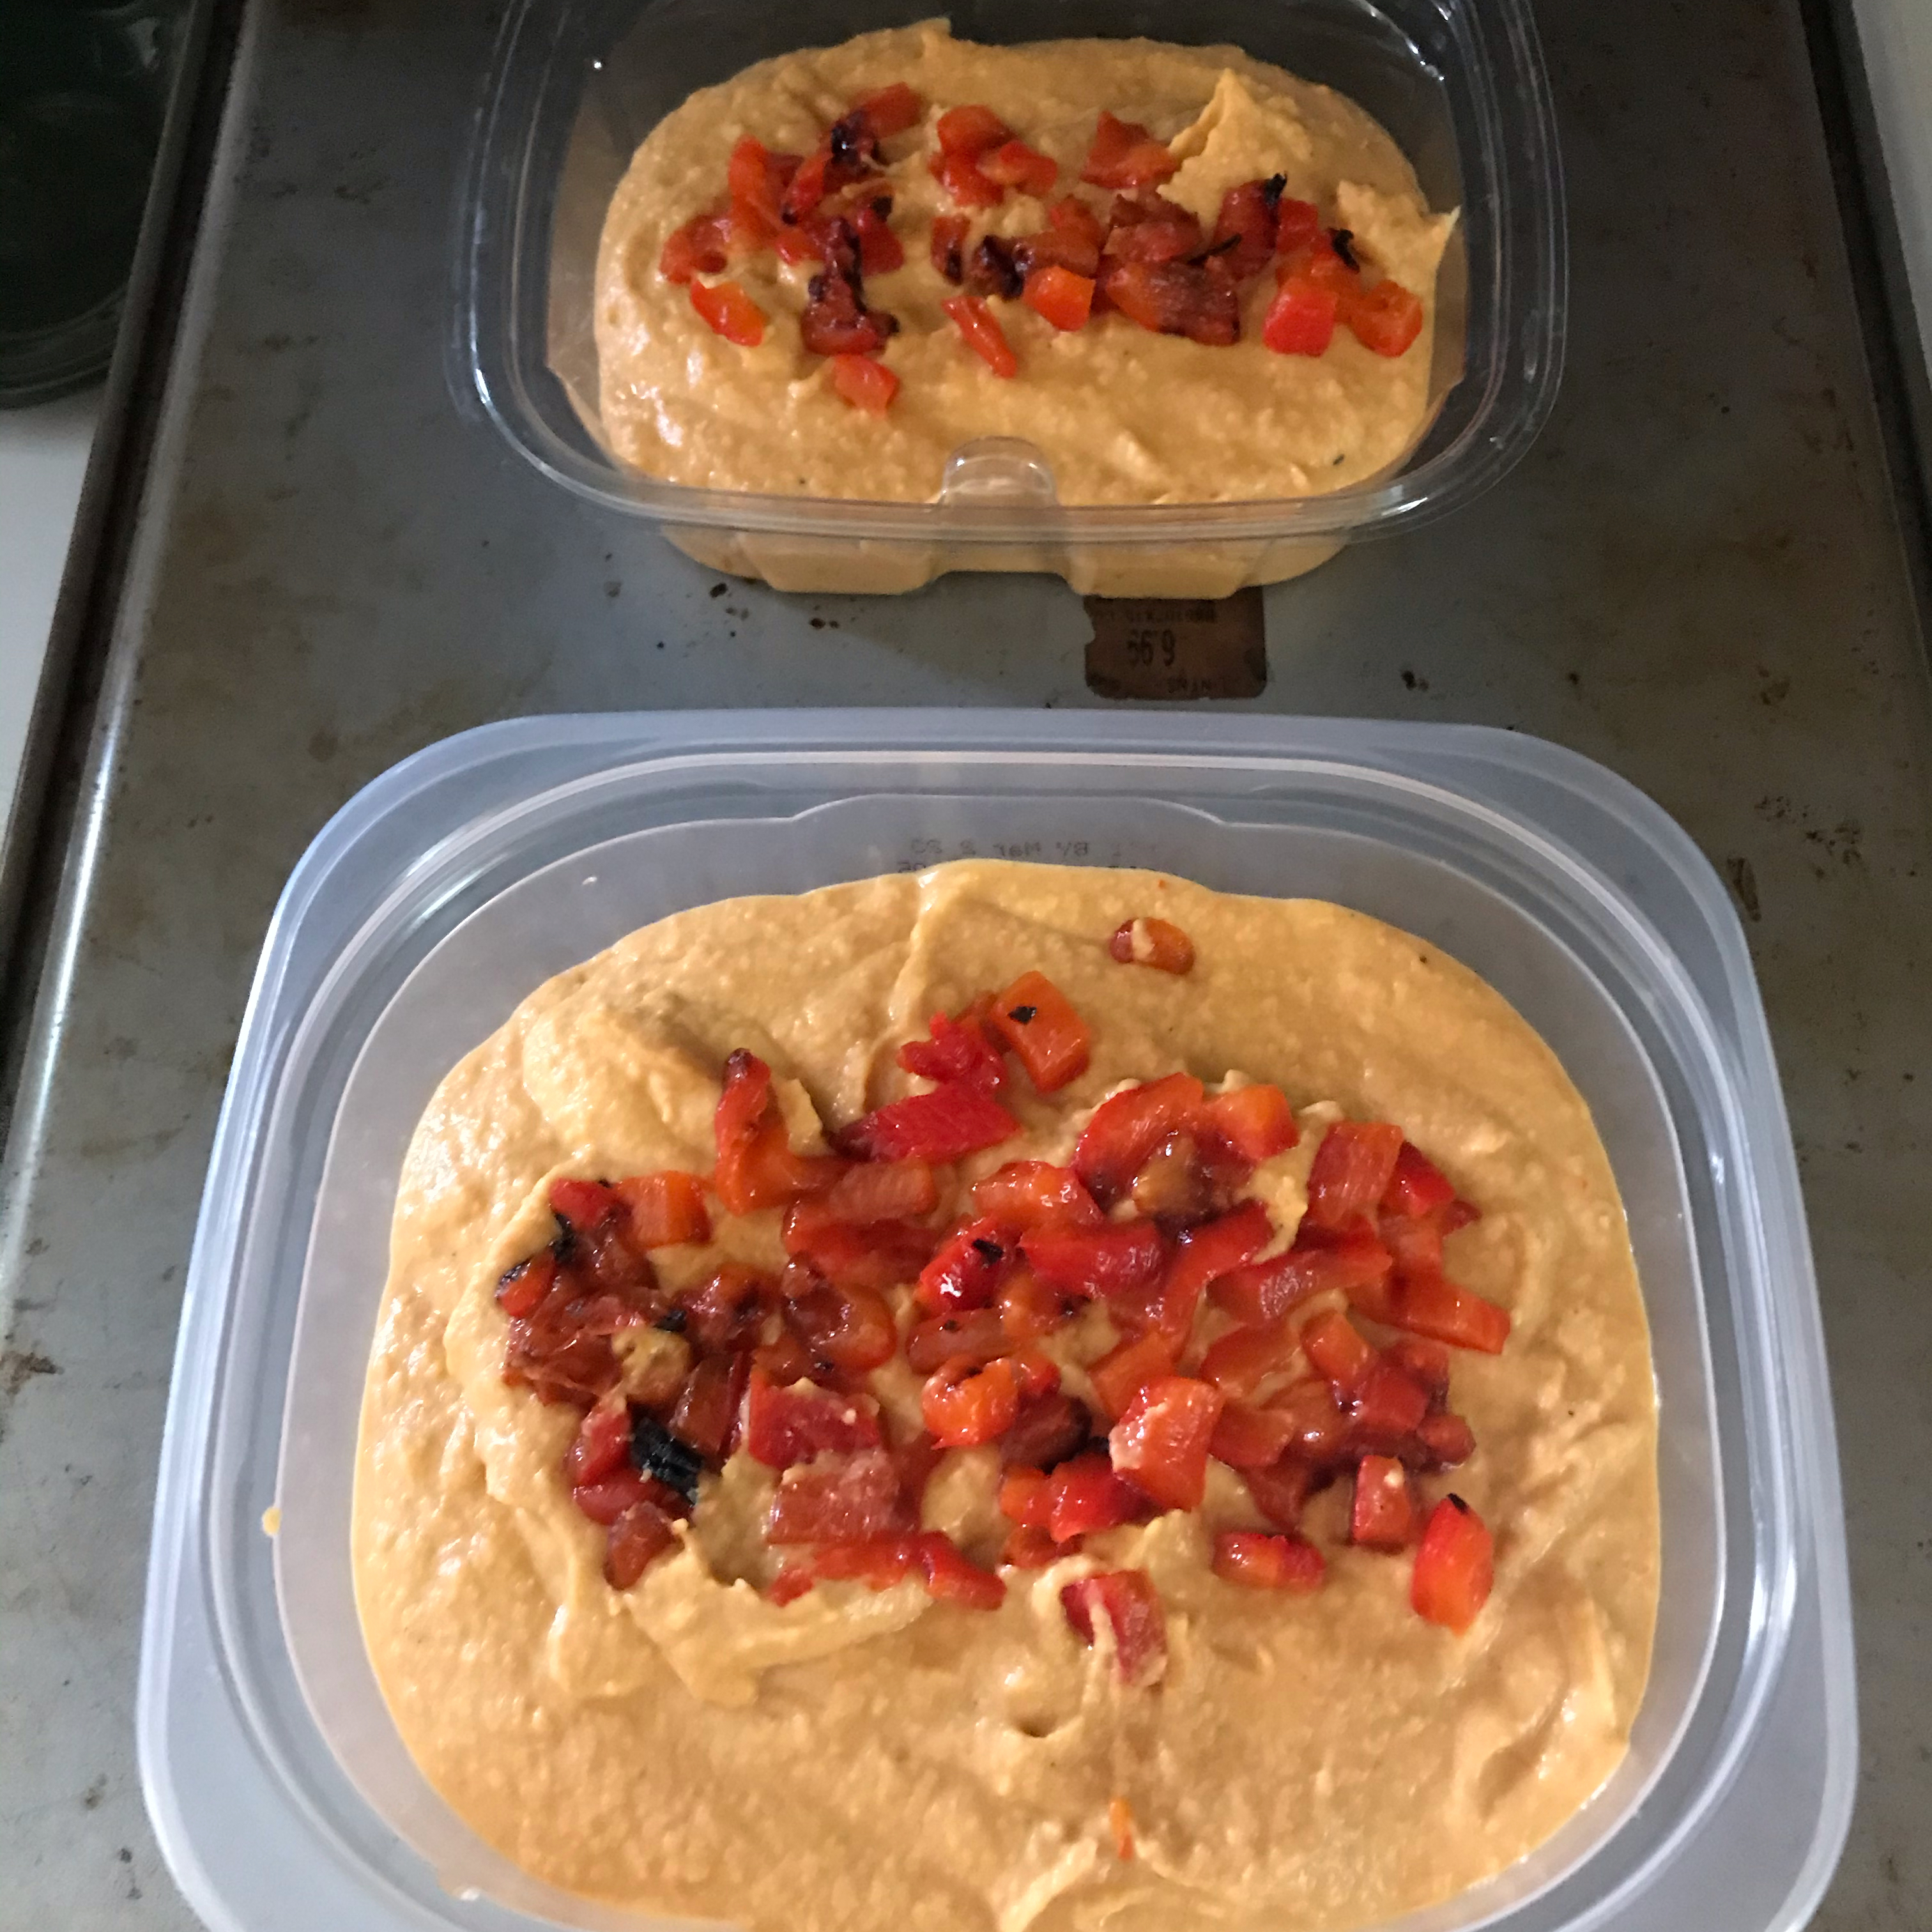 Authentic Kicked-Up Syrian Hummus